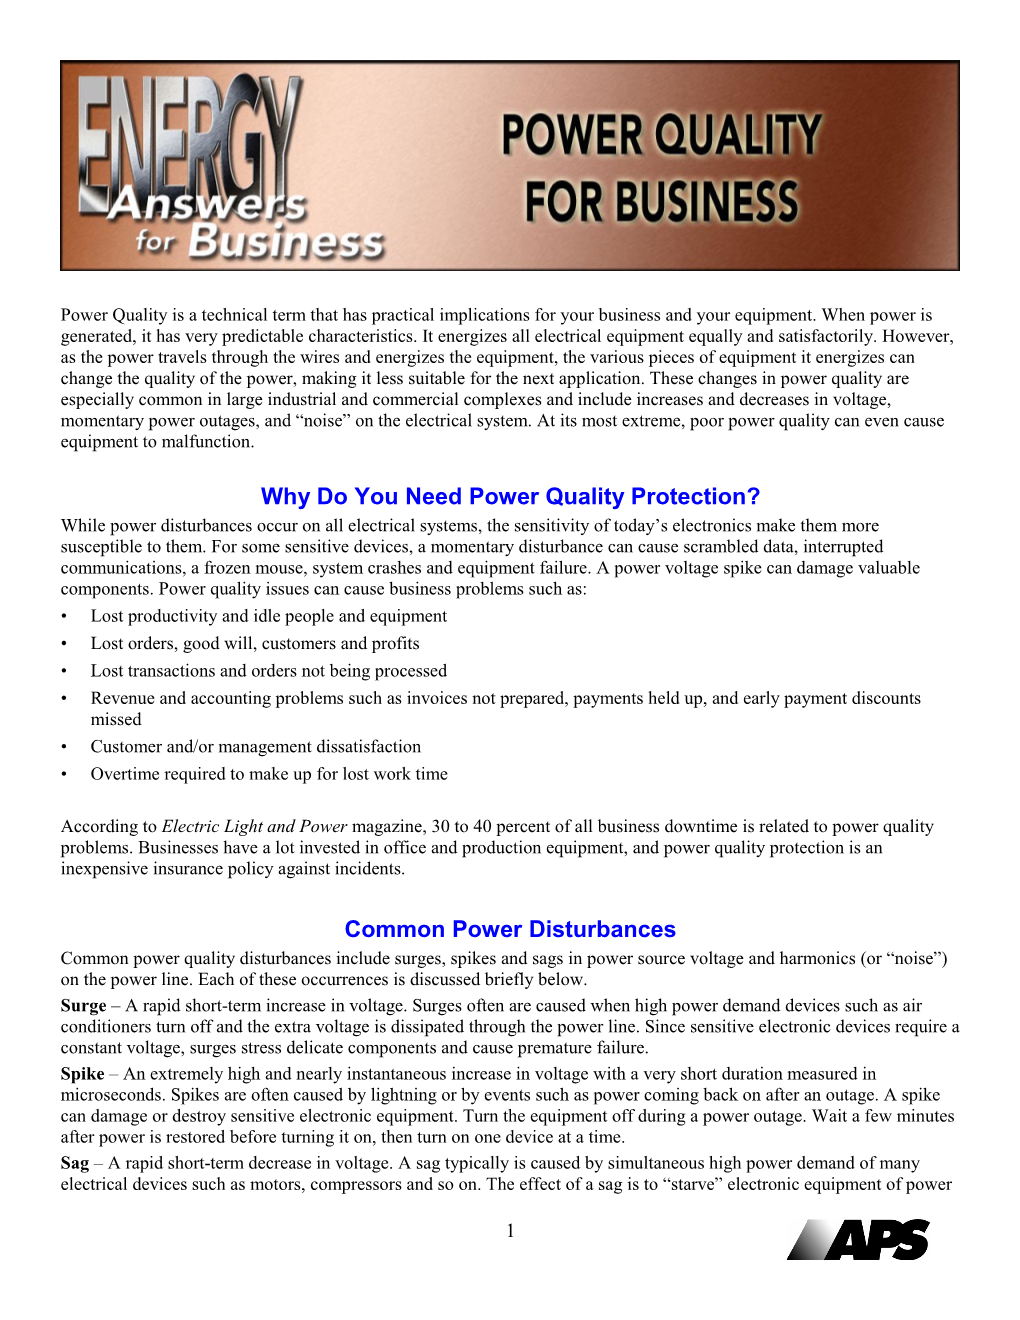 Why Do You Need Power Quality Protection? Common Power